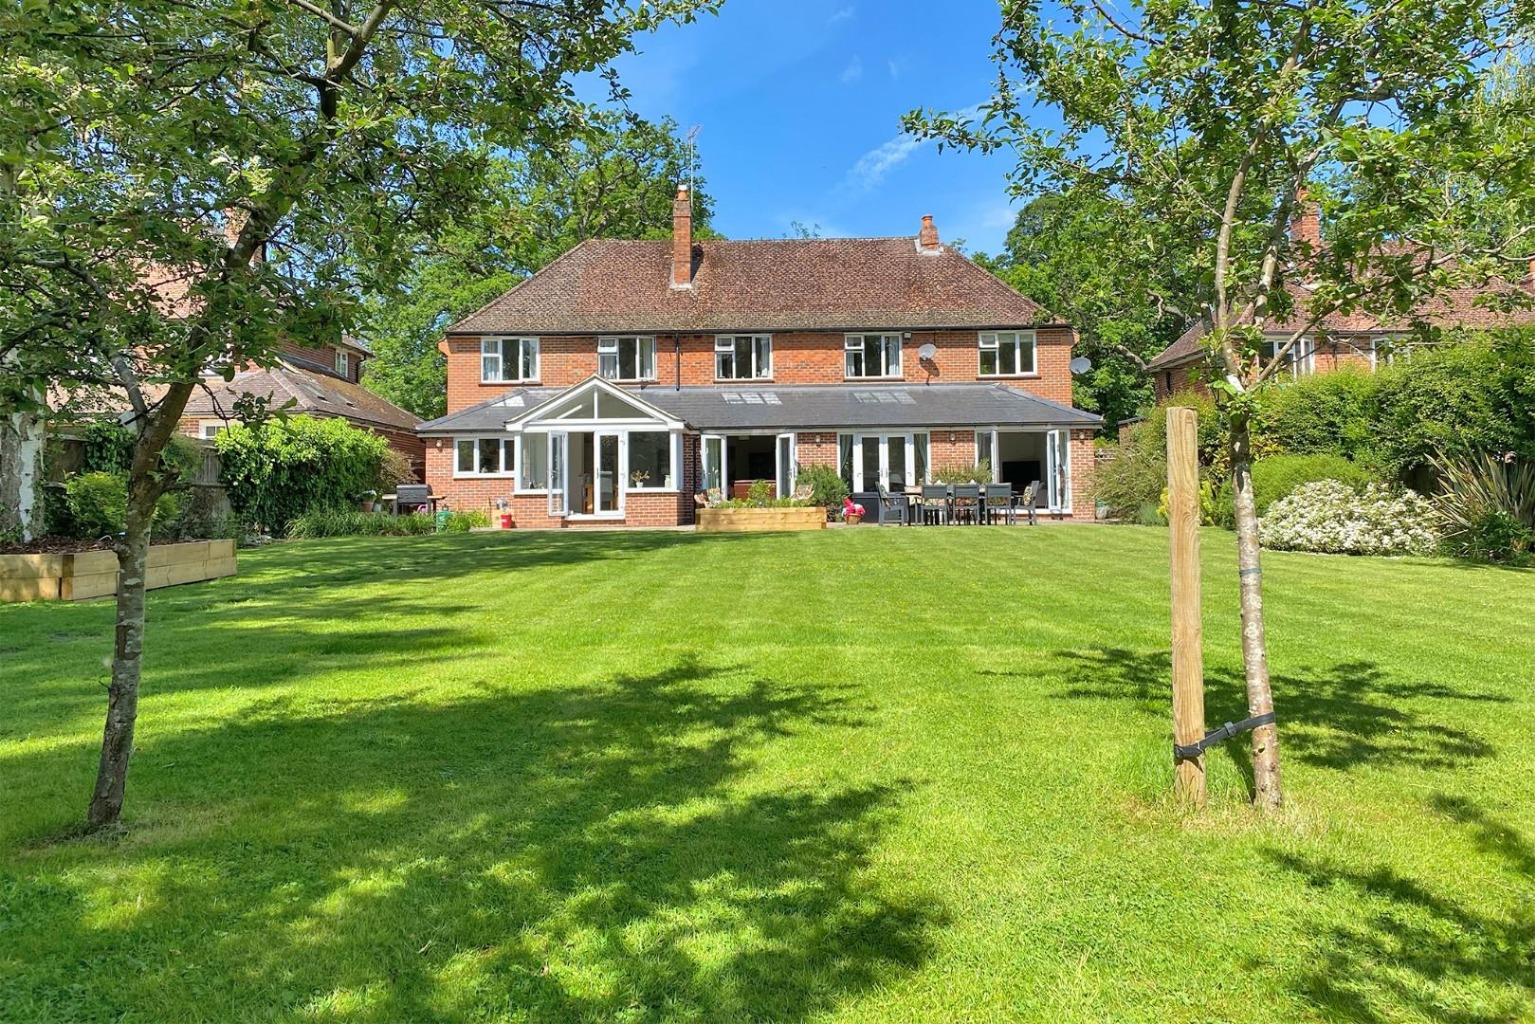 Drey House is set behind a mature hedgerow just off of the Finchampstead Road. This substantial four bedroom detached family home is presented in immaculate condition throughout. The four bedrooms, three reception rooms and two bathrooms make this an ideal family home.